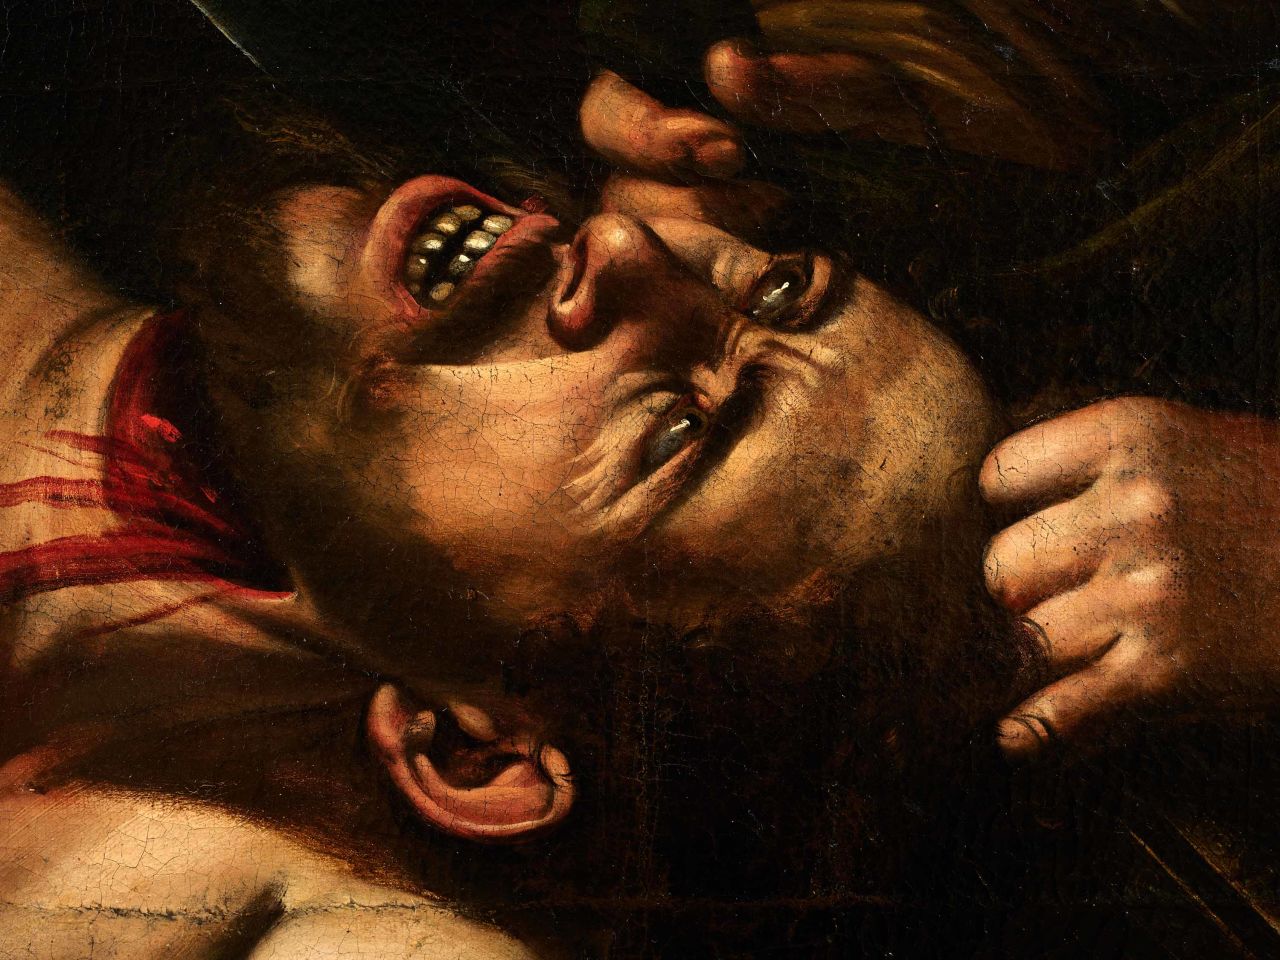 No record of 'Judith and Holofernes' exists after 1689.